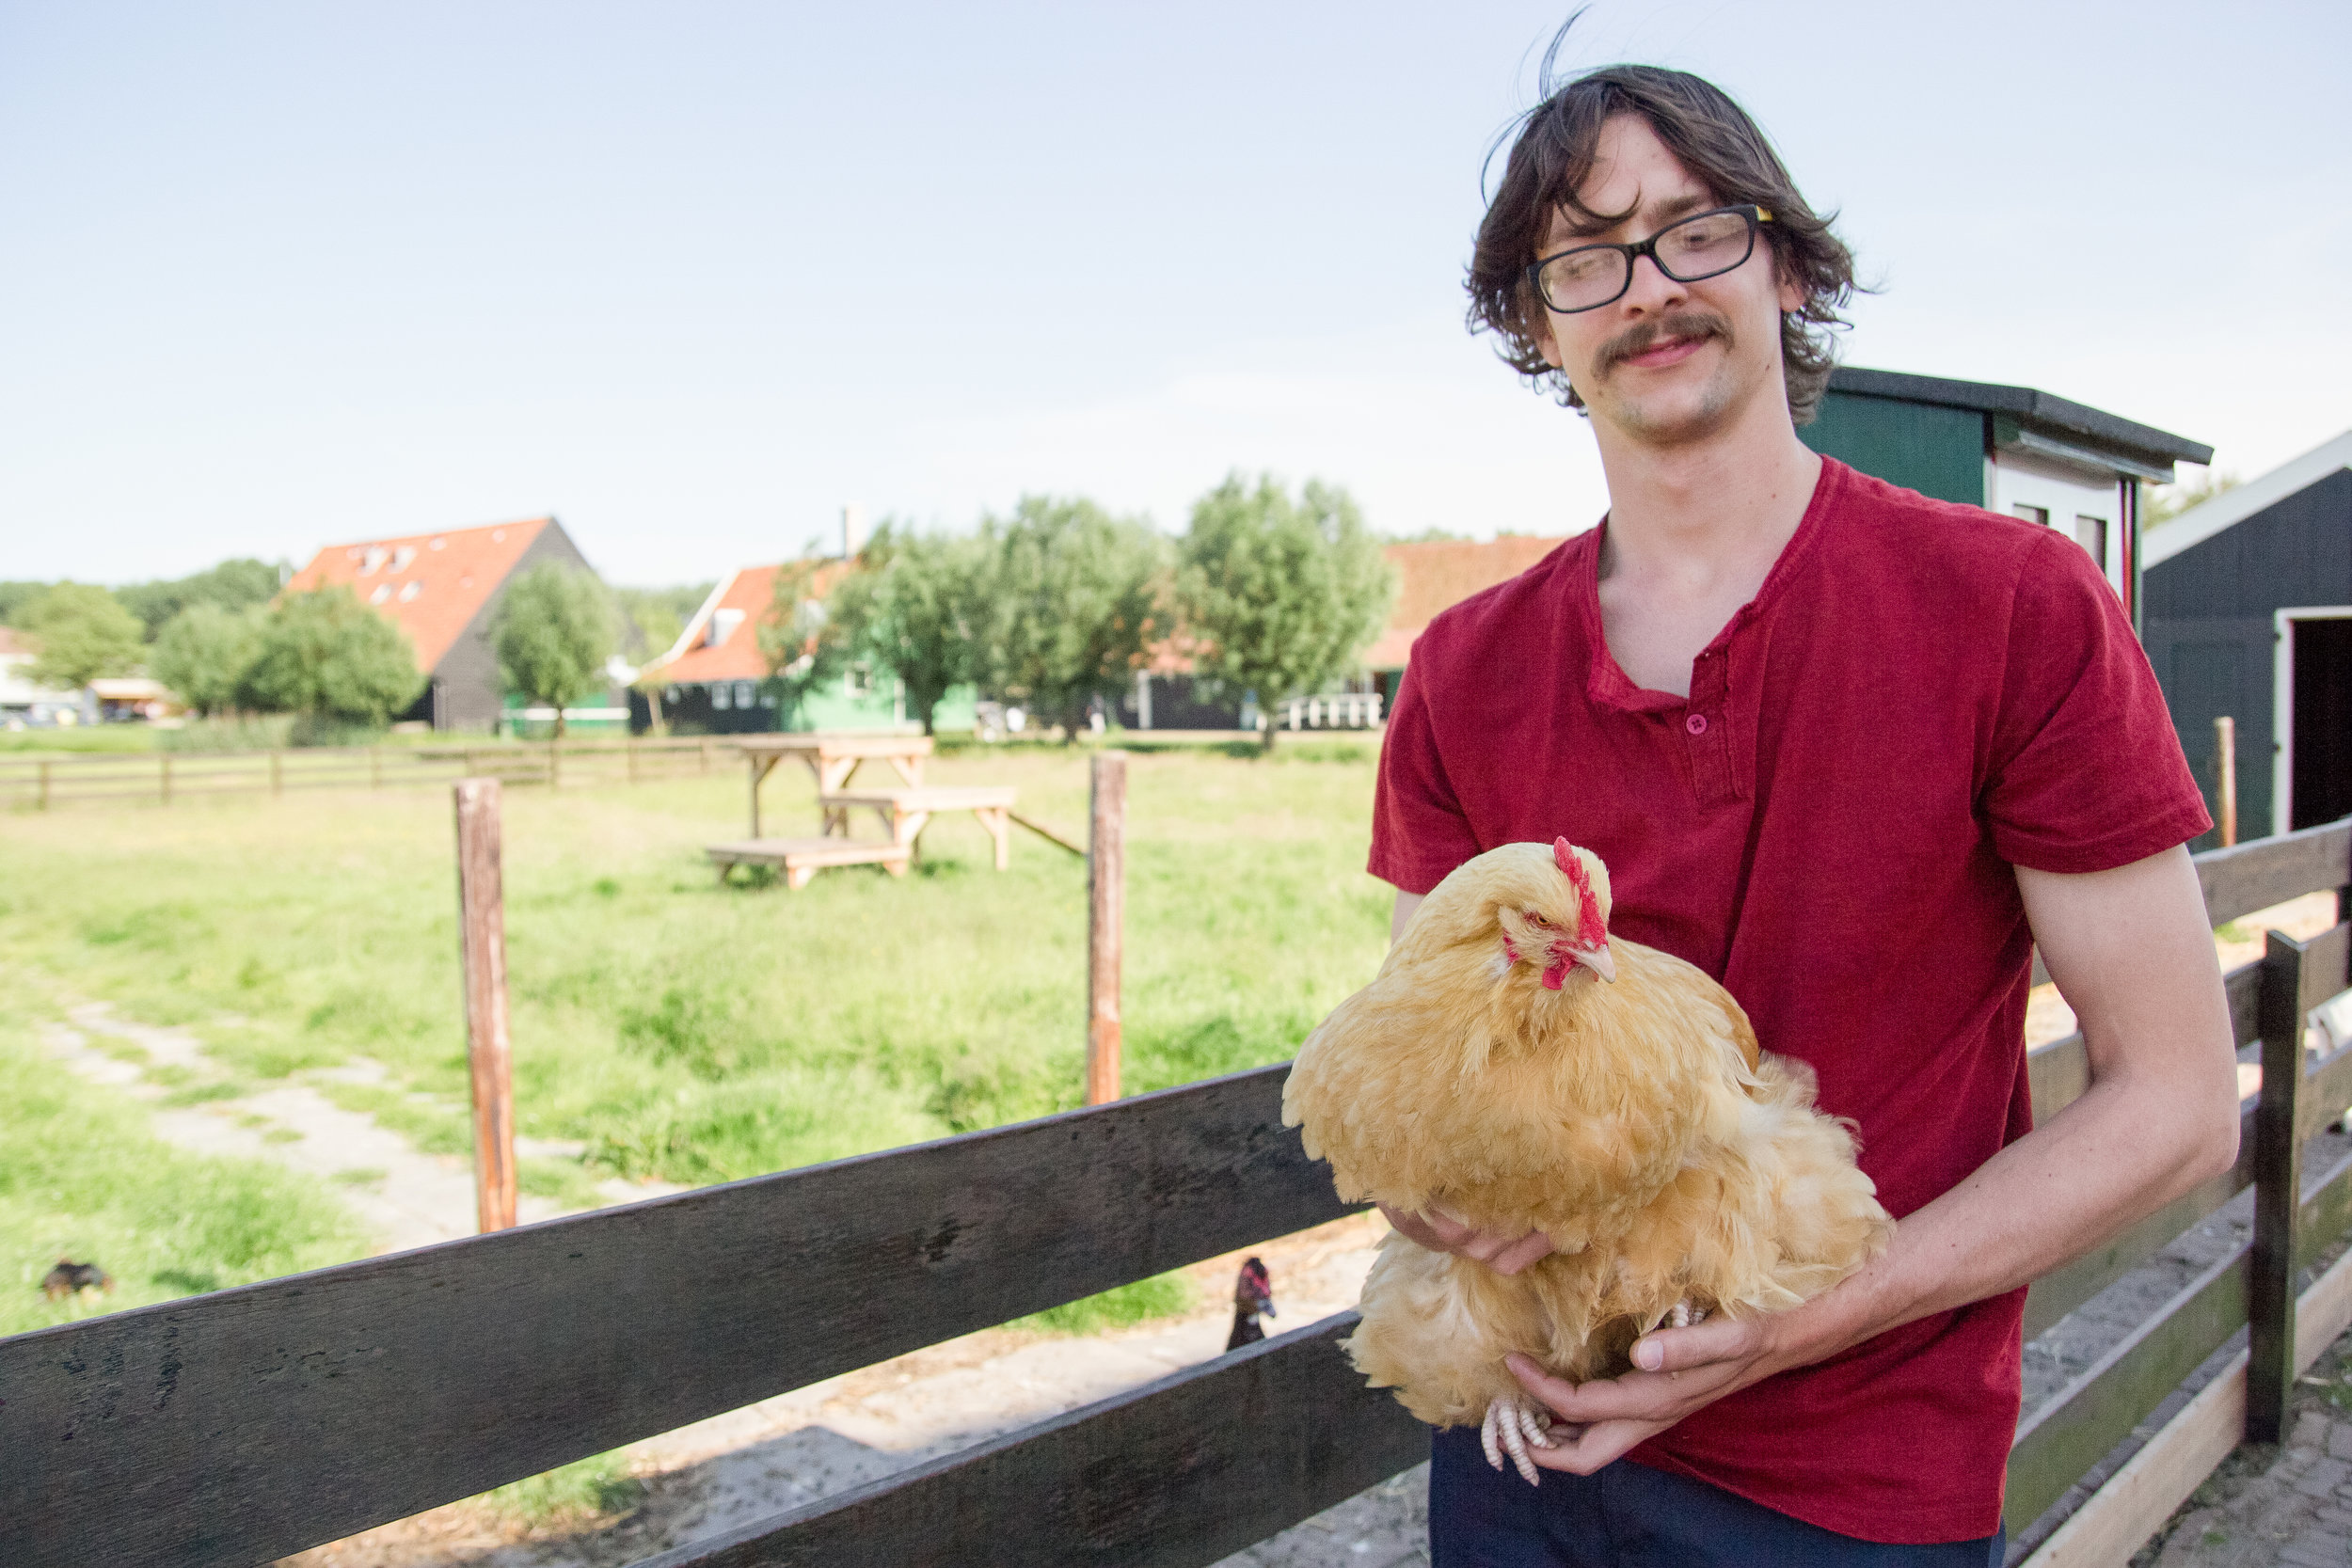  This is a chicken. Chickens make me happy, which is why my usual RBF is not present. Unfortunately, to make up for my nice smile, I have been caught in the middle of blinking and look like I might be a reptilian overlord in charge of the New World Order. 